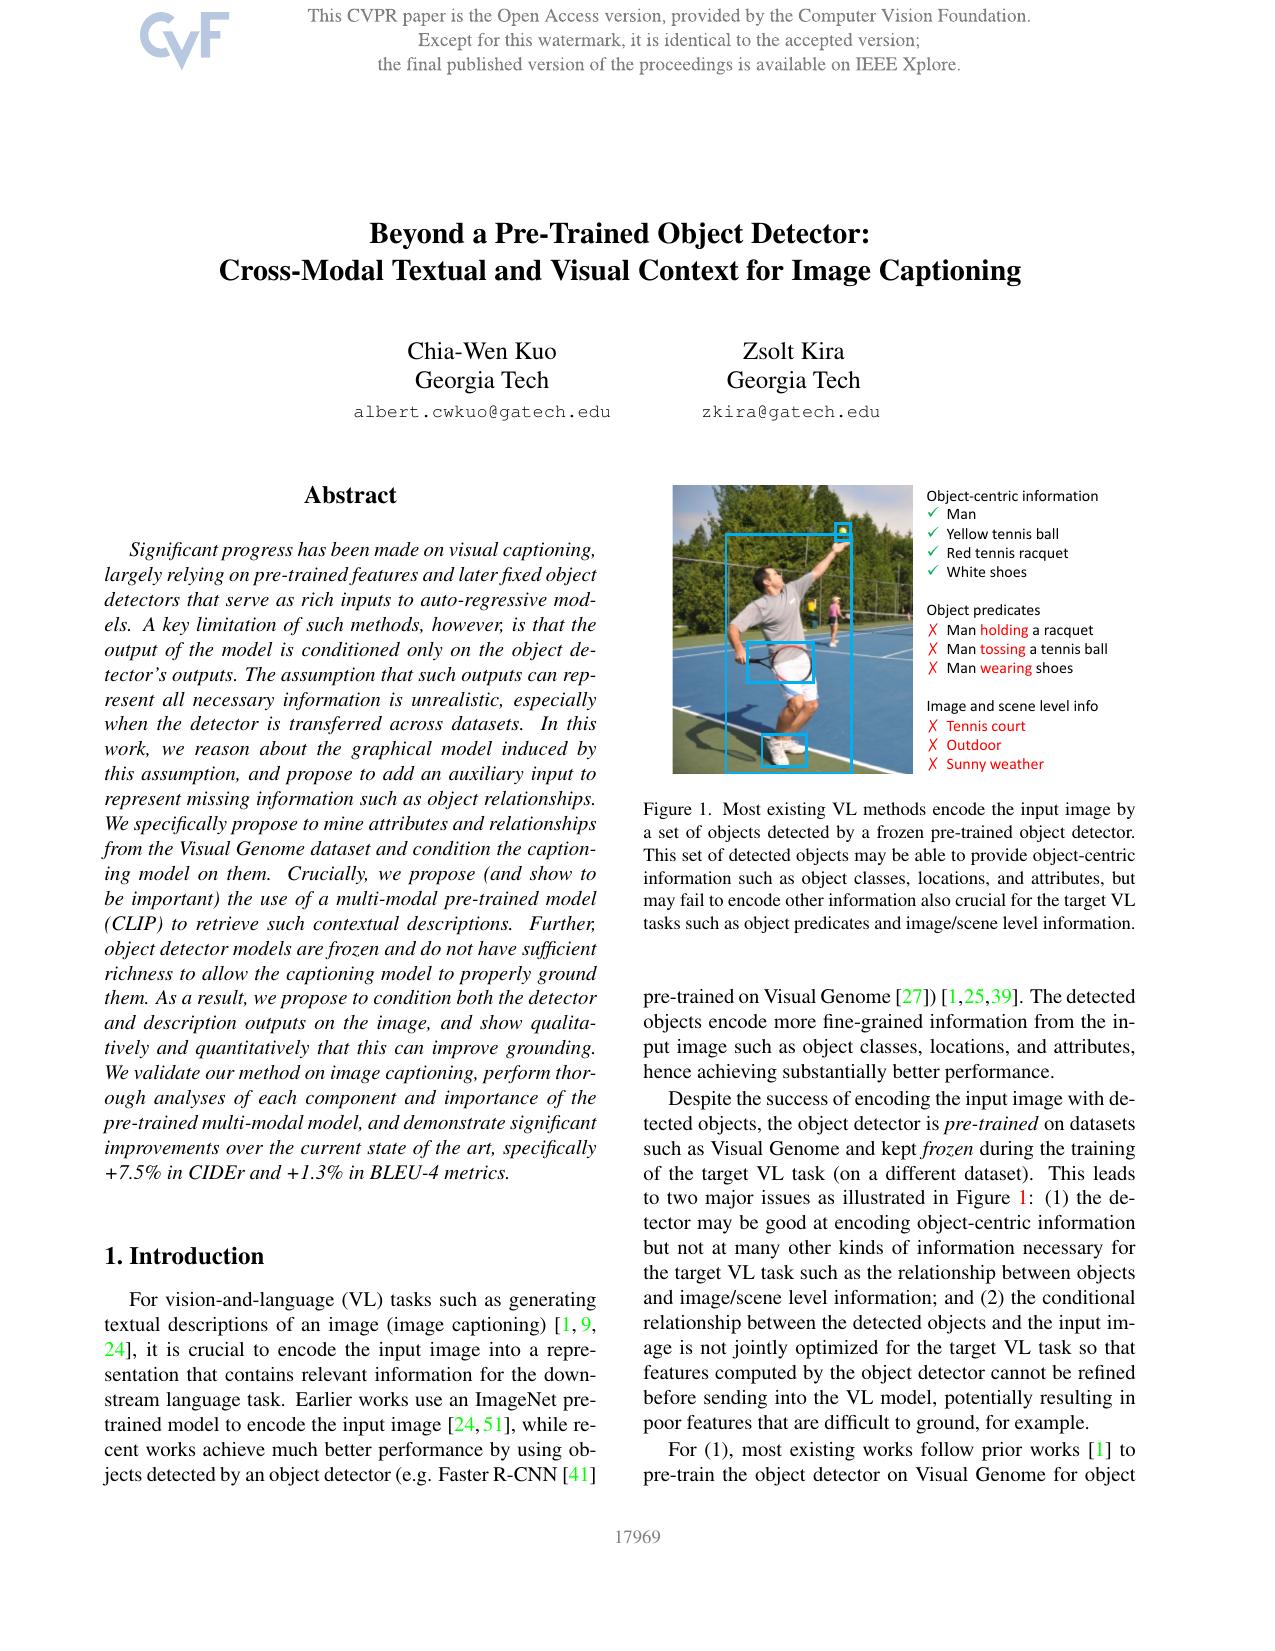 Beyond a Pre-Trained Object Detector: Cross-Modal Textual and Visual Context for Image Captioning by Chia-Wen Kuo & Zsolt Kira